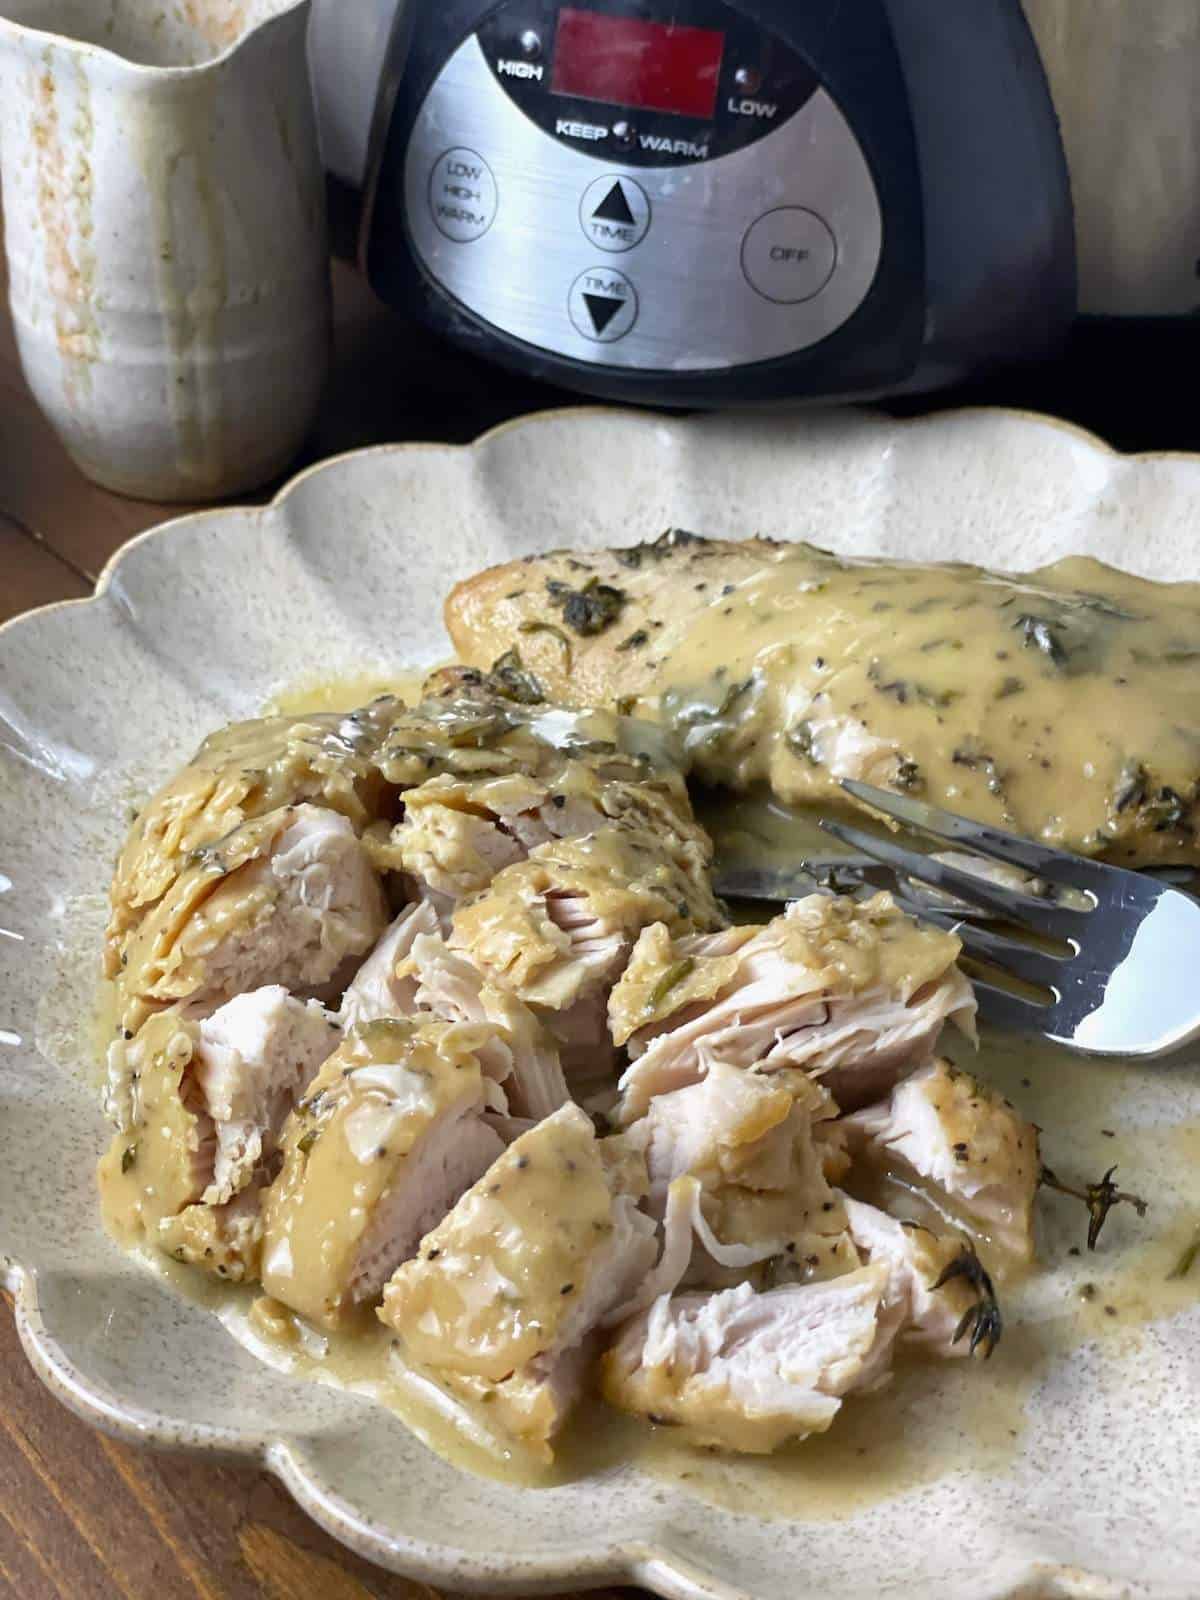 A cut up turkey tenderloin covered in gravy on a scalloped plate in from of a crockpot.